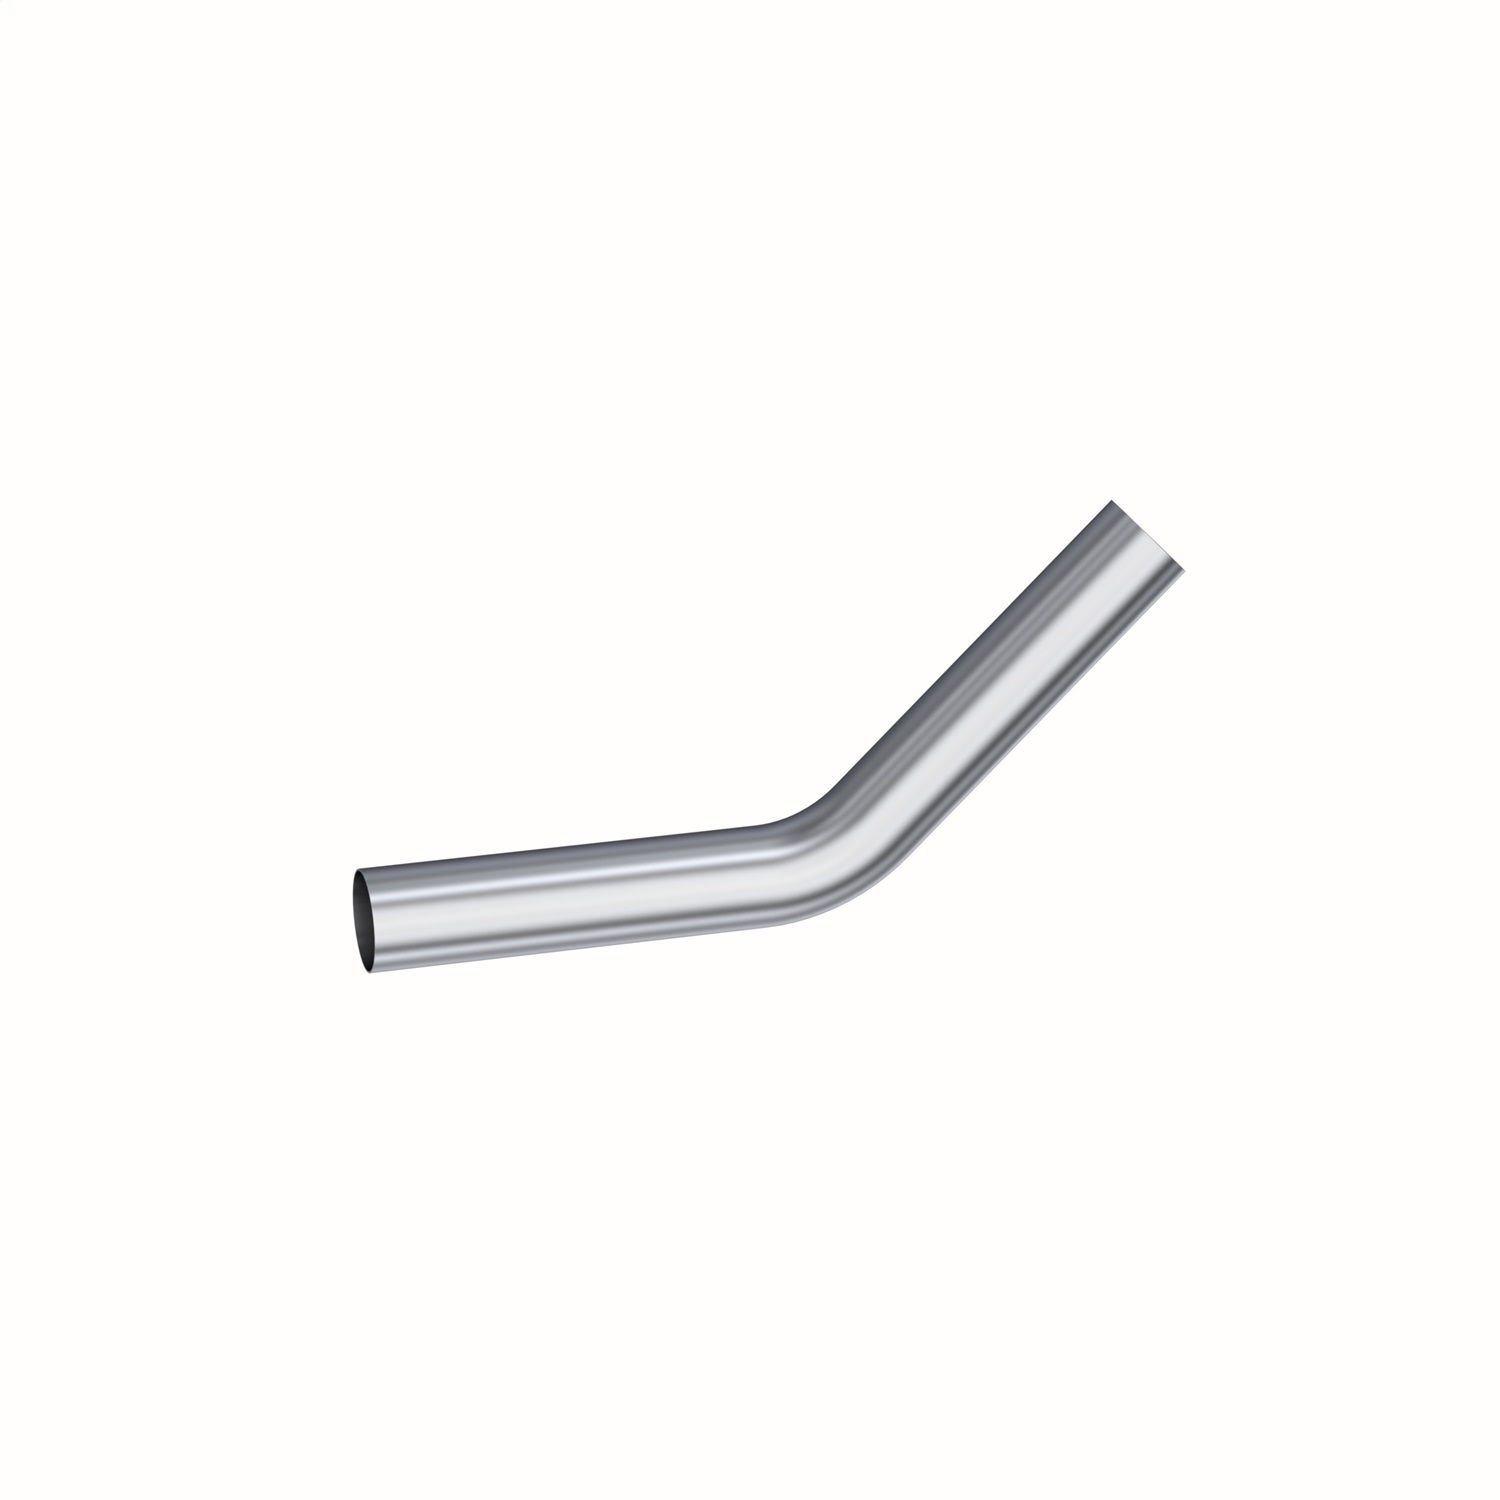 MBRP Exhaust MBRP Exhaust MB2044 Garage Parts; Installer Series Smooth Mandrel Bend Pipe